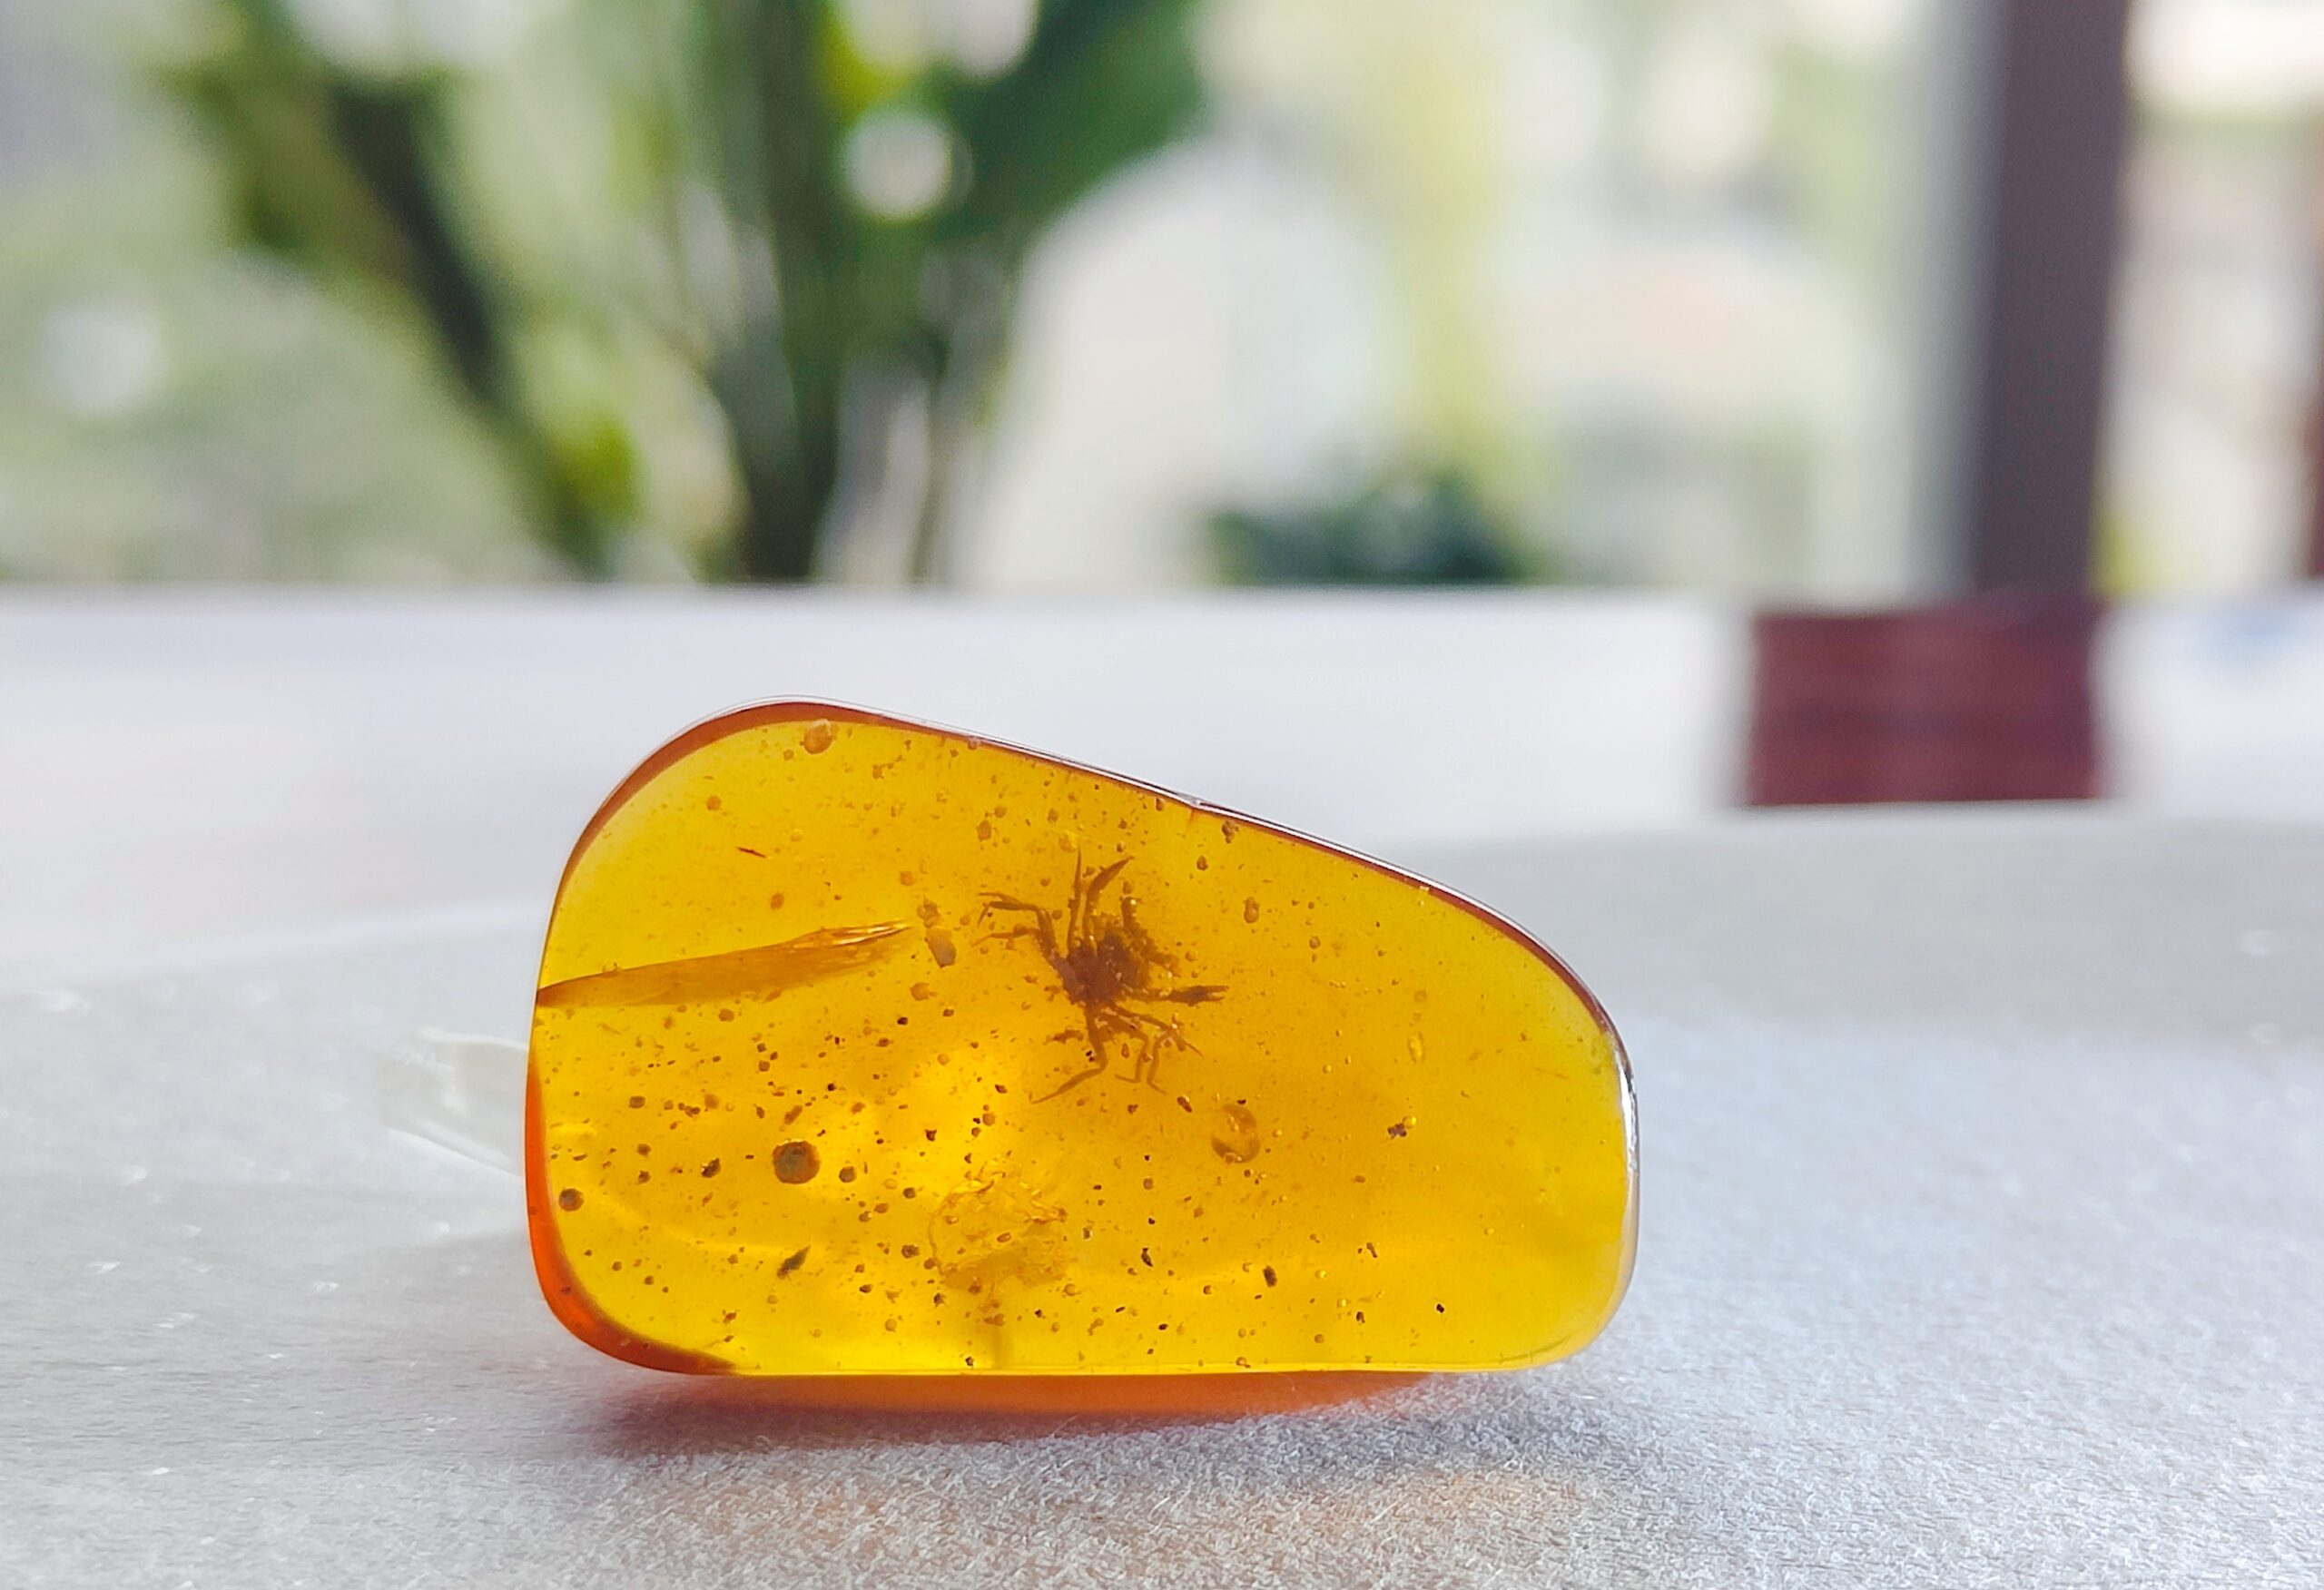 Entombed in amber, this tiny crab hails from the age of dinosaurs